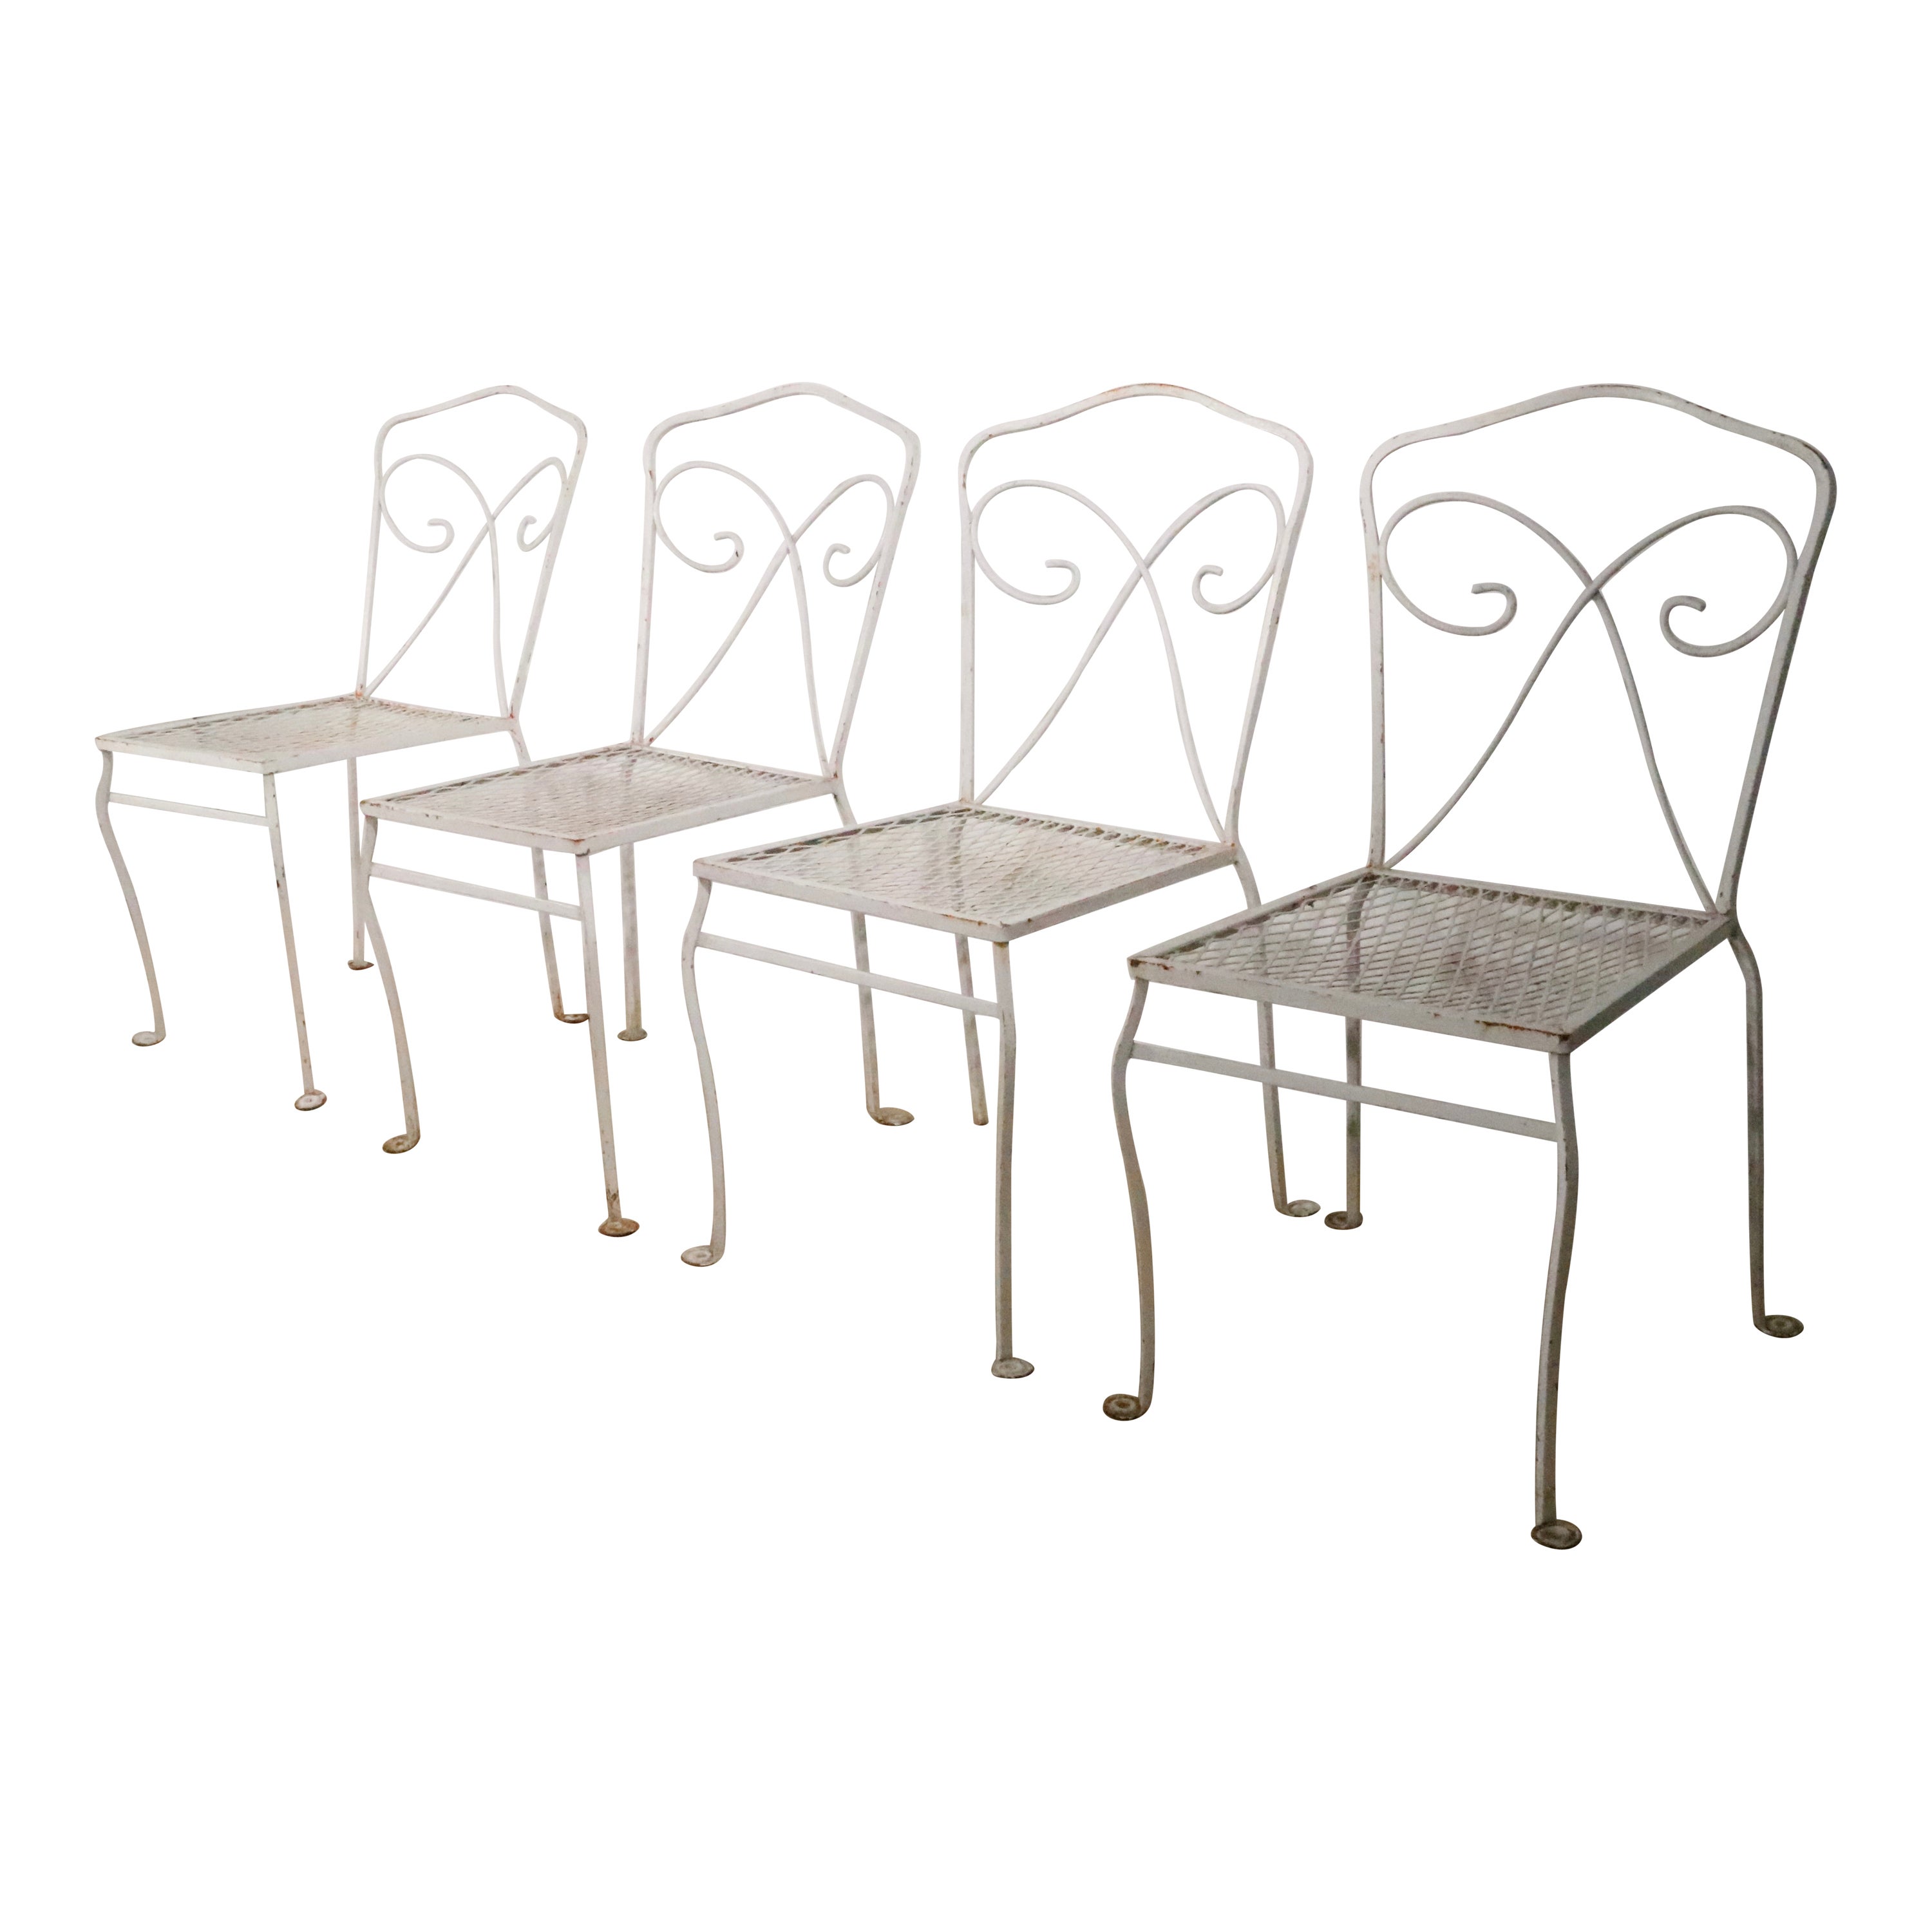 Set of Four Wrought Iron Garden Patio Chairs Possibly by Woodard c 1950/1970s 